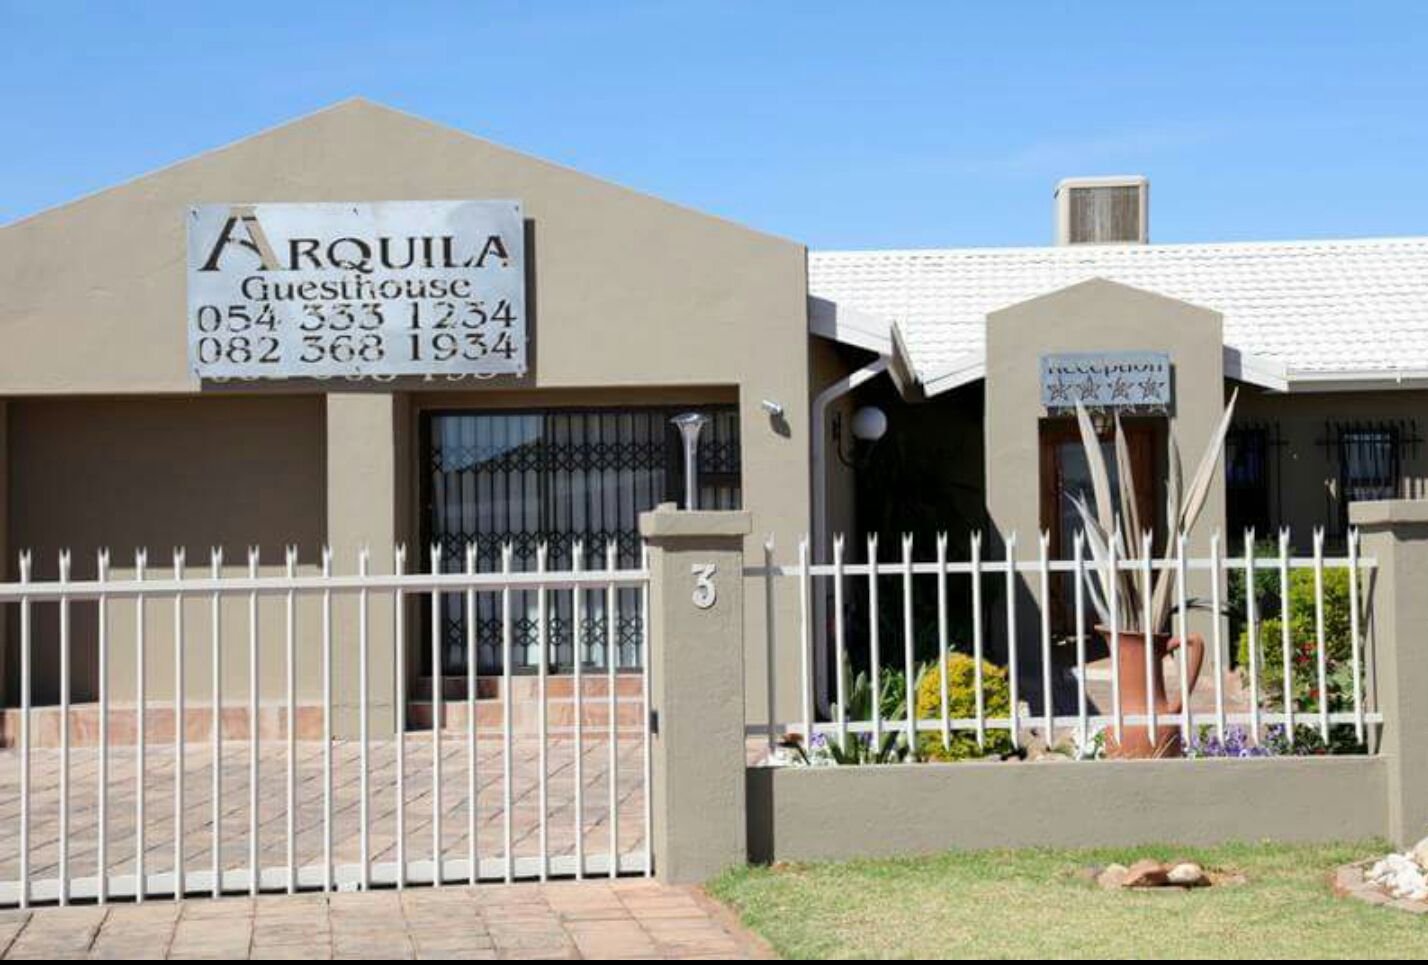 Arquila Guesthouse Keidebees Upington Northern Cape South Africa House, Building, Architecture, Sign